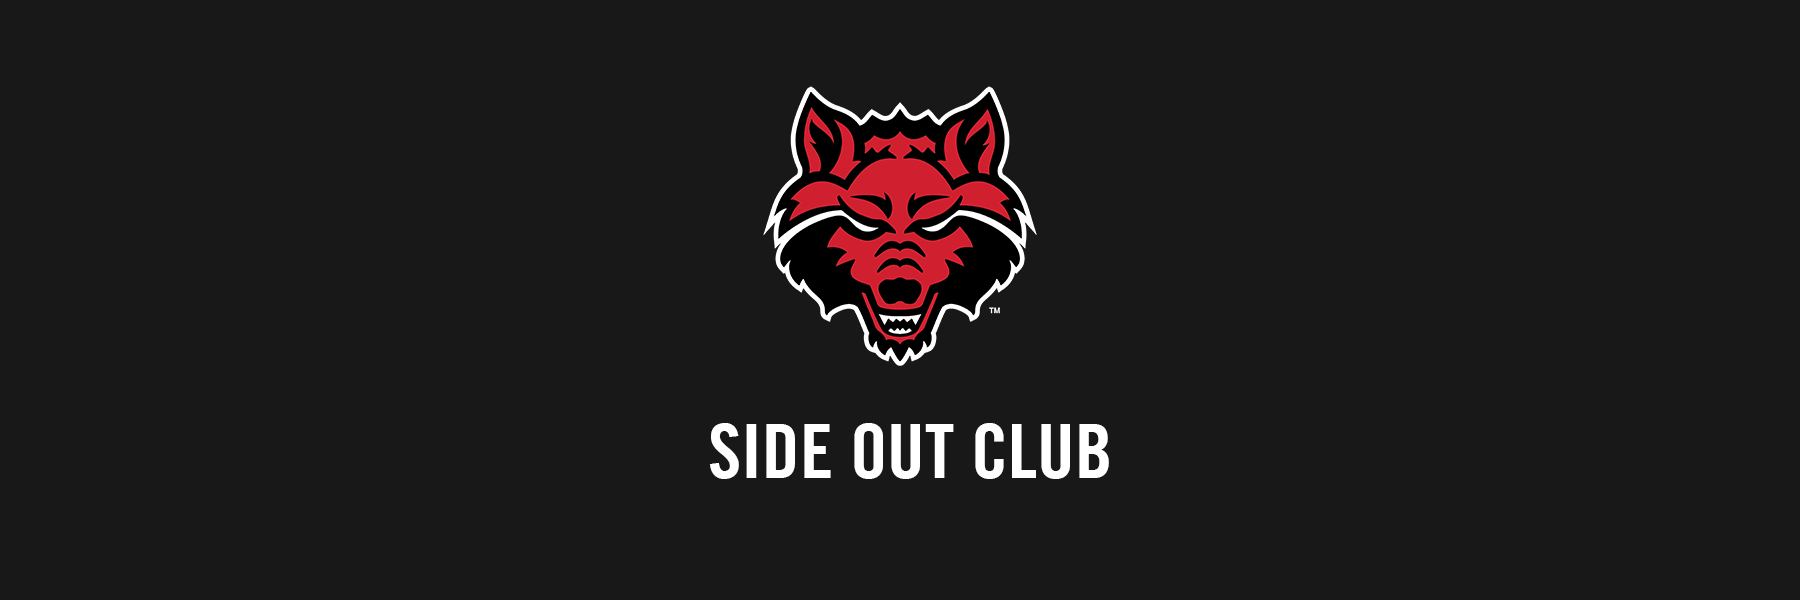 Side out club